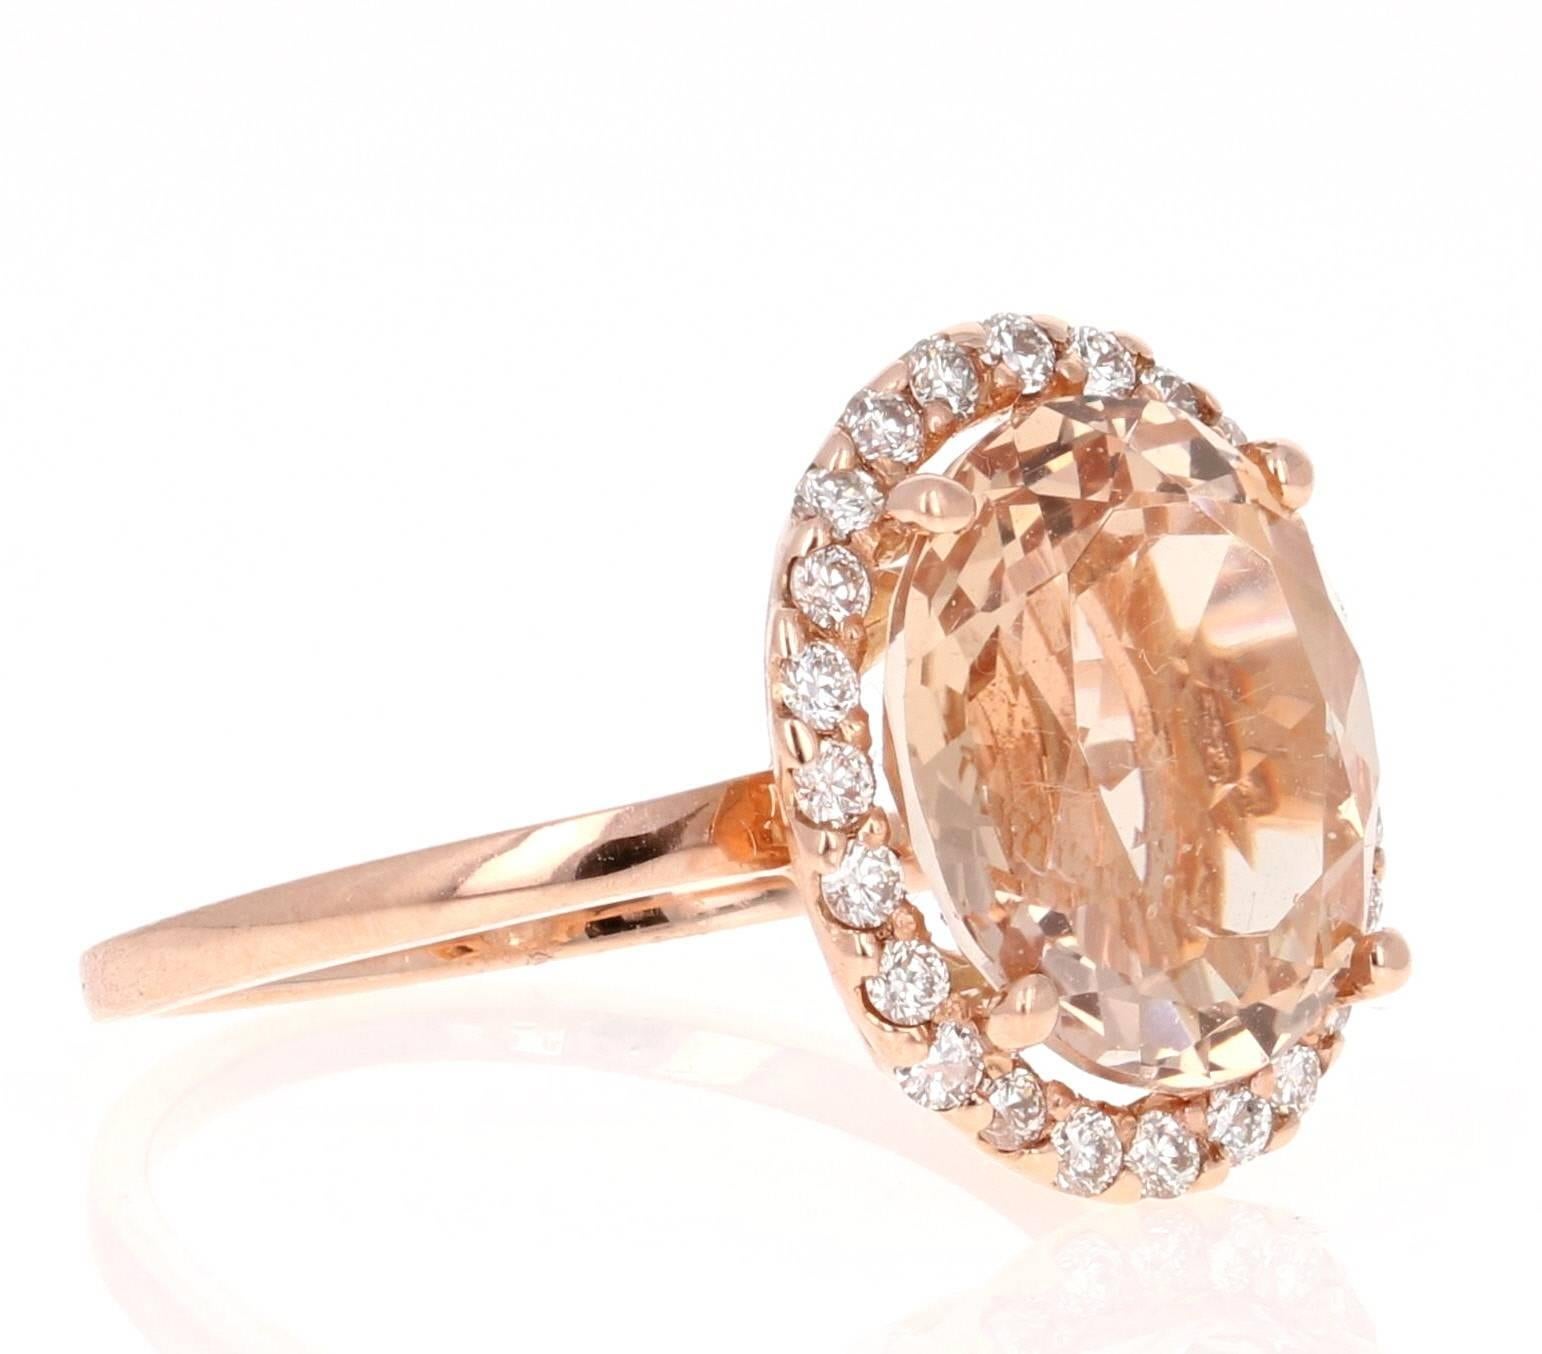 This classic Morganite Ring has a Oval Cut 5.26 Carat Morganite as its center and is surrounded by a halo of 24 Round Cut Diamonds that weigh 0.40 Carats. The clarity and color of the diamonds are VS-H. 
It is set in 14K Rose Gold and is a size 7